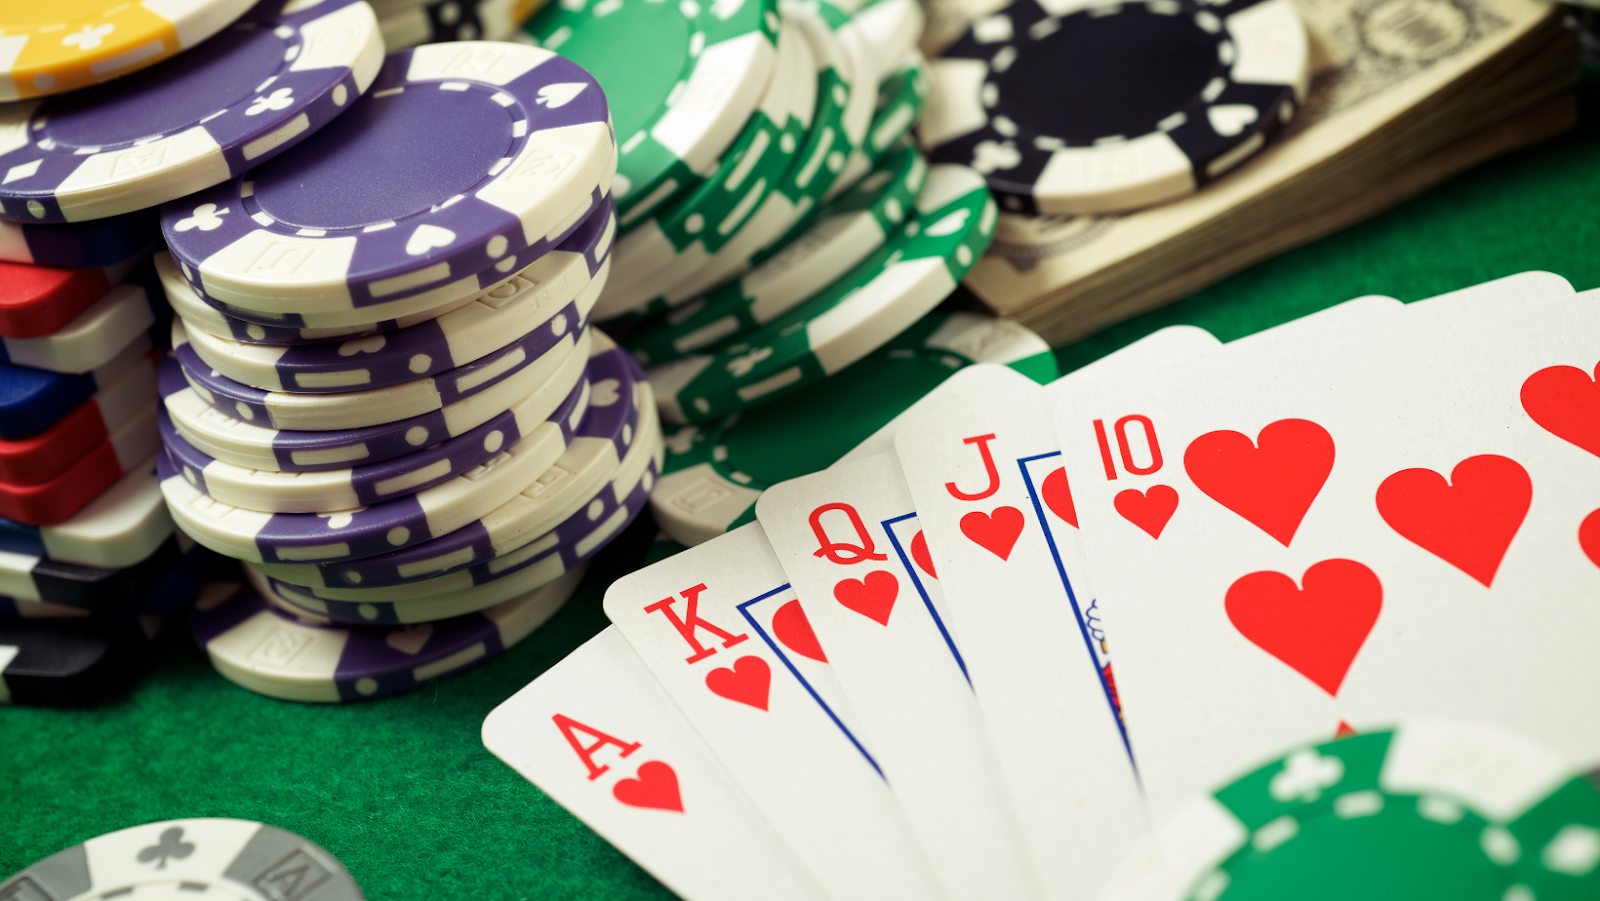 What Makes a Great User-Friendly Online Casino Interface